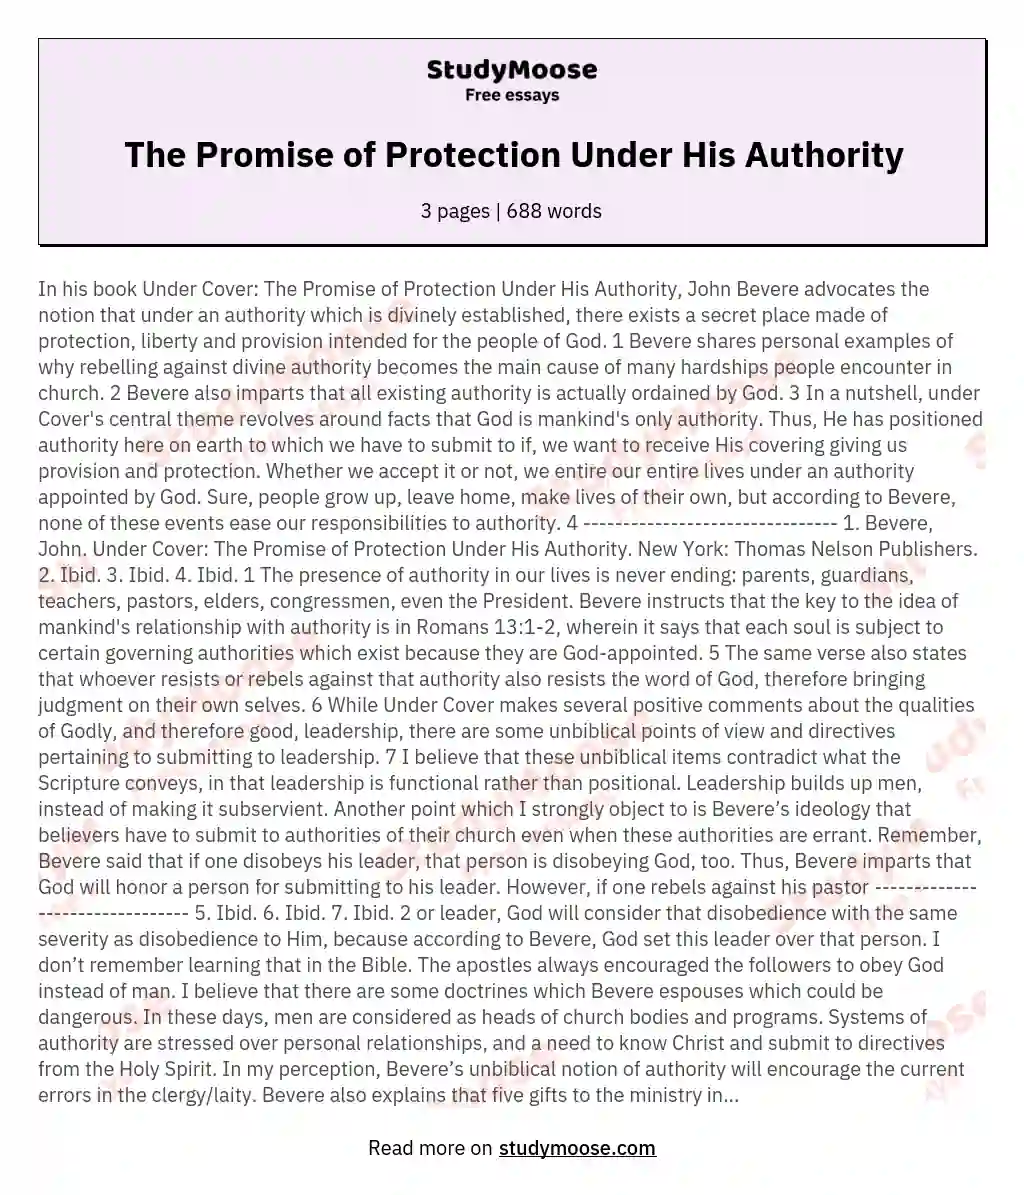 The Promise of Protection Under His Authority essay